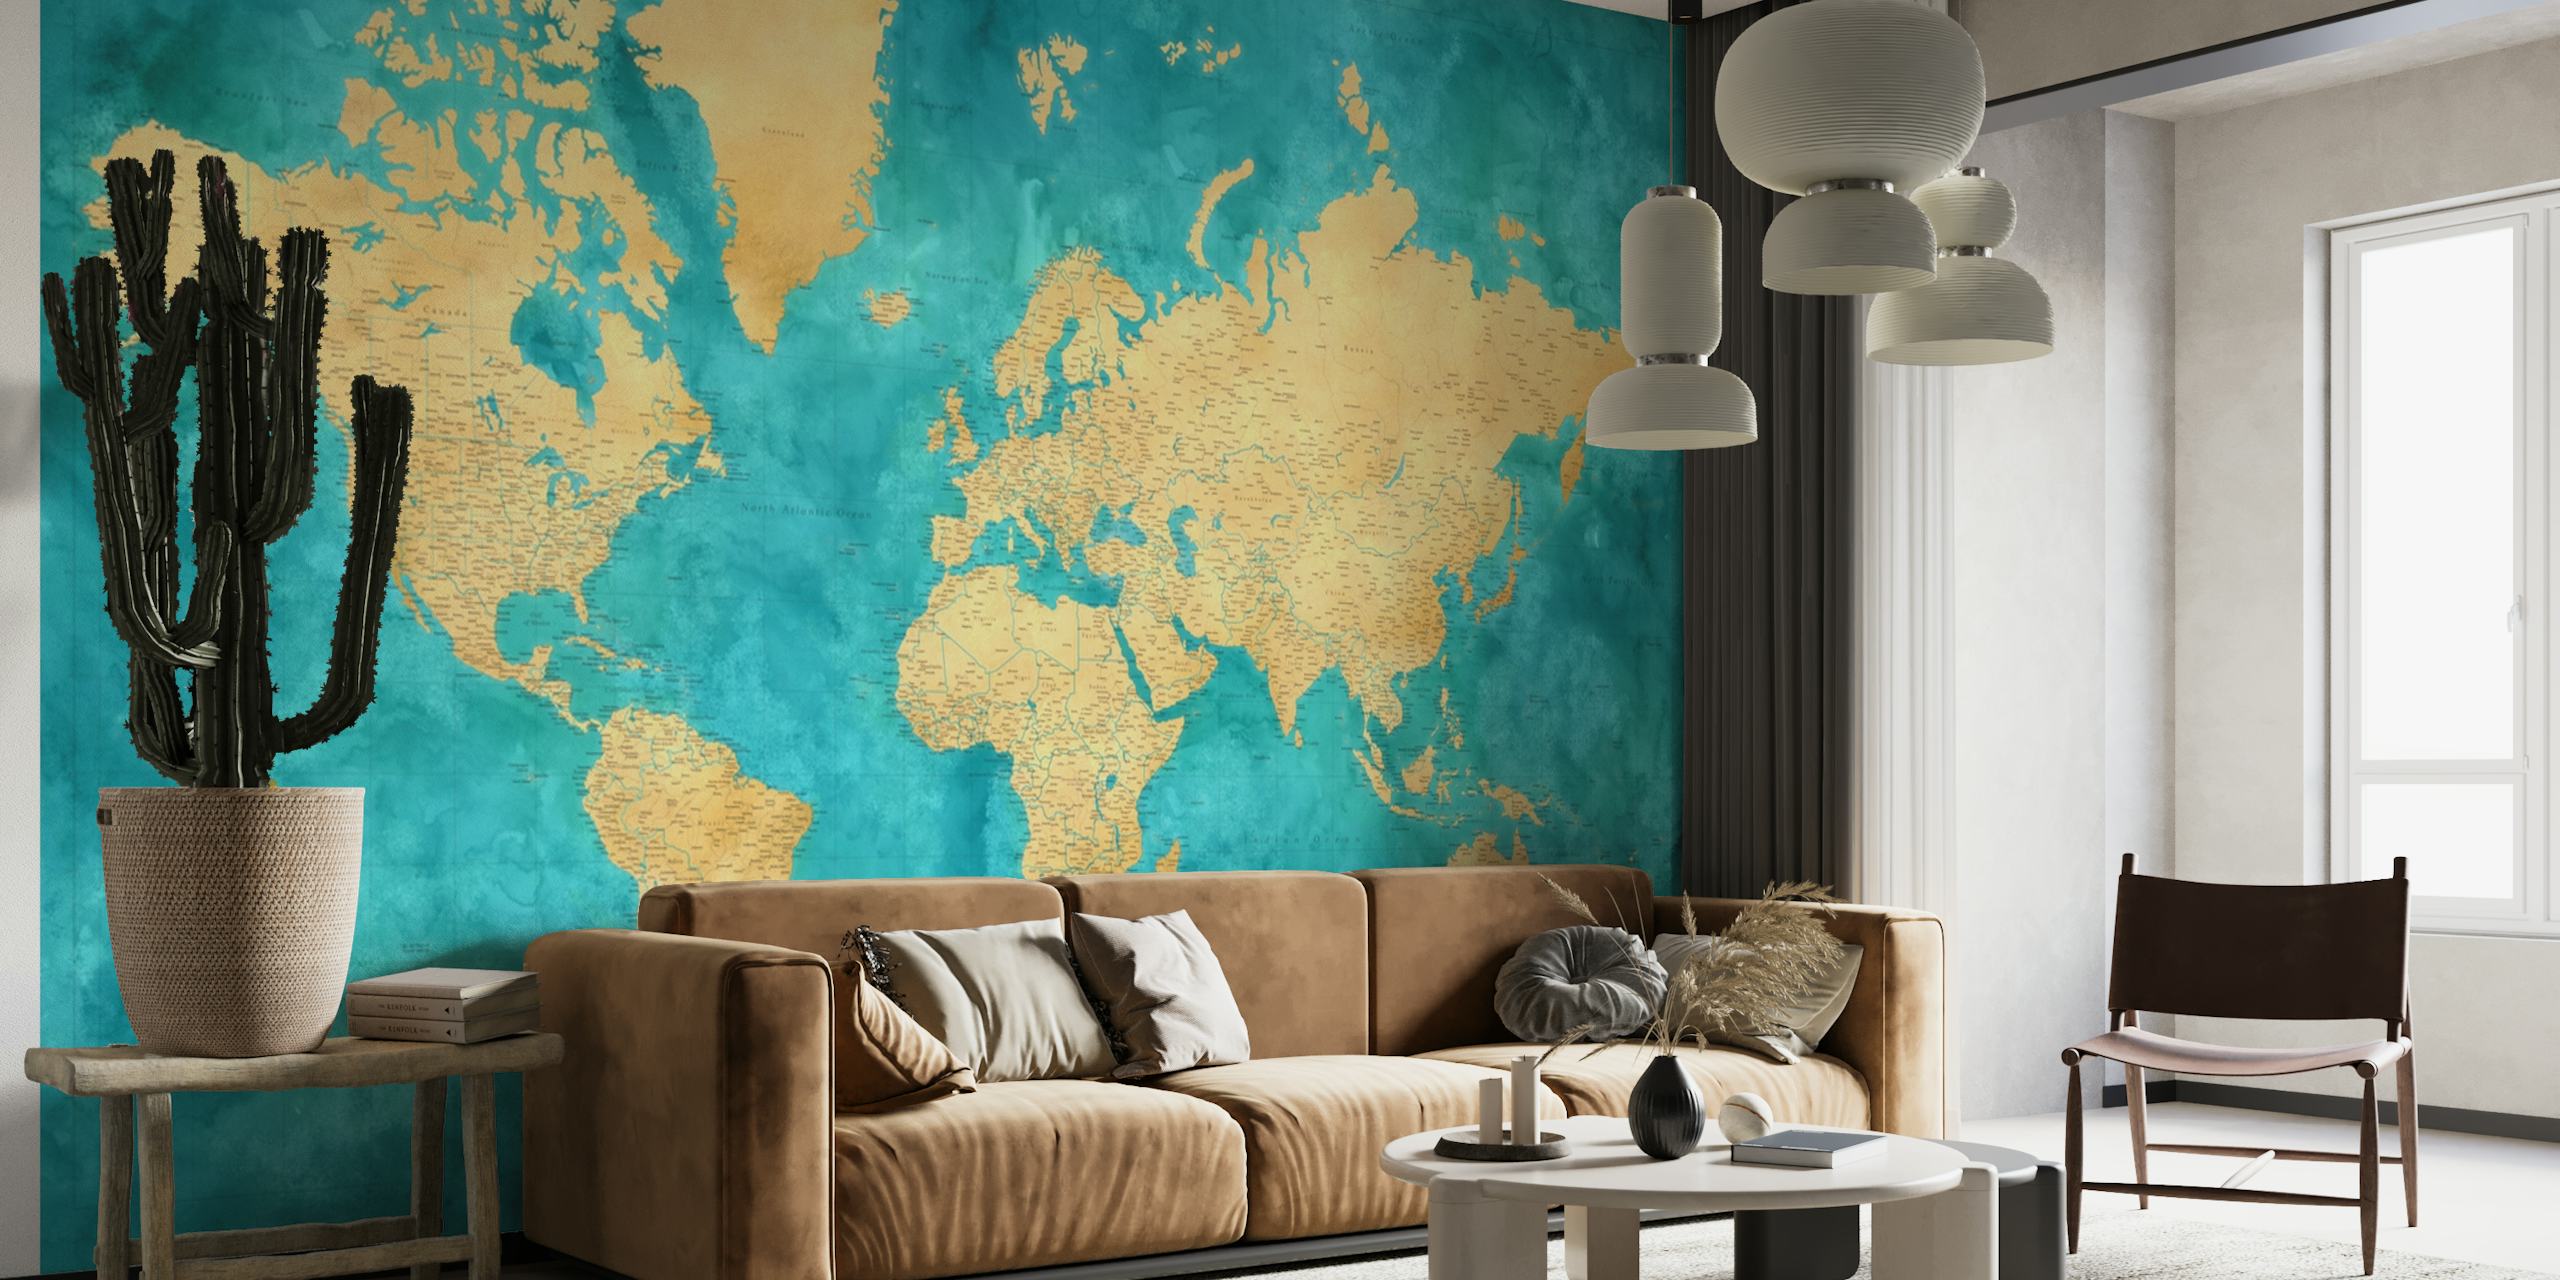 High detail world map Lexy wall mural with turquoise watercolor background